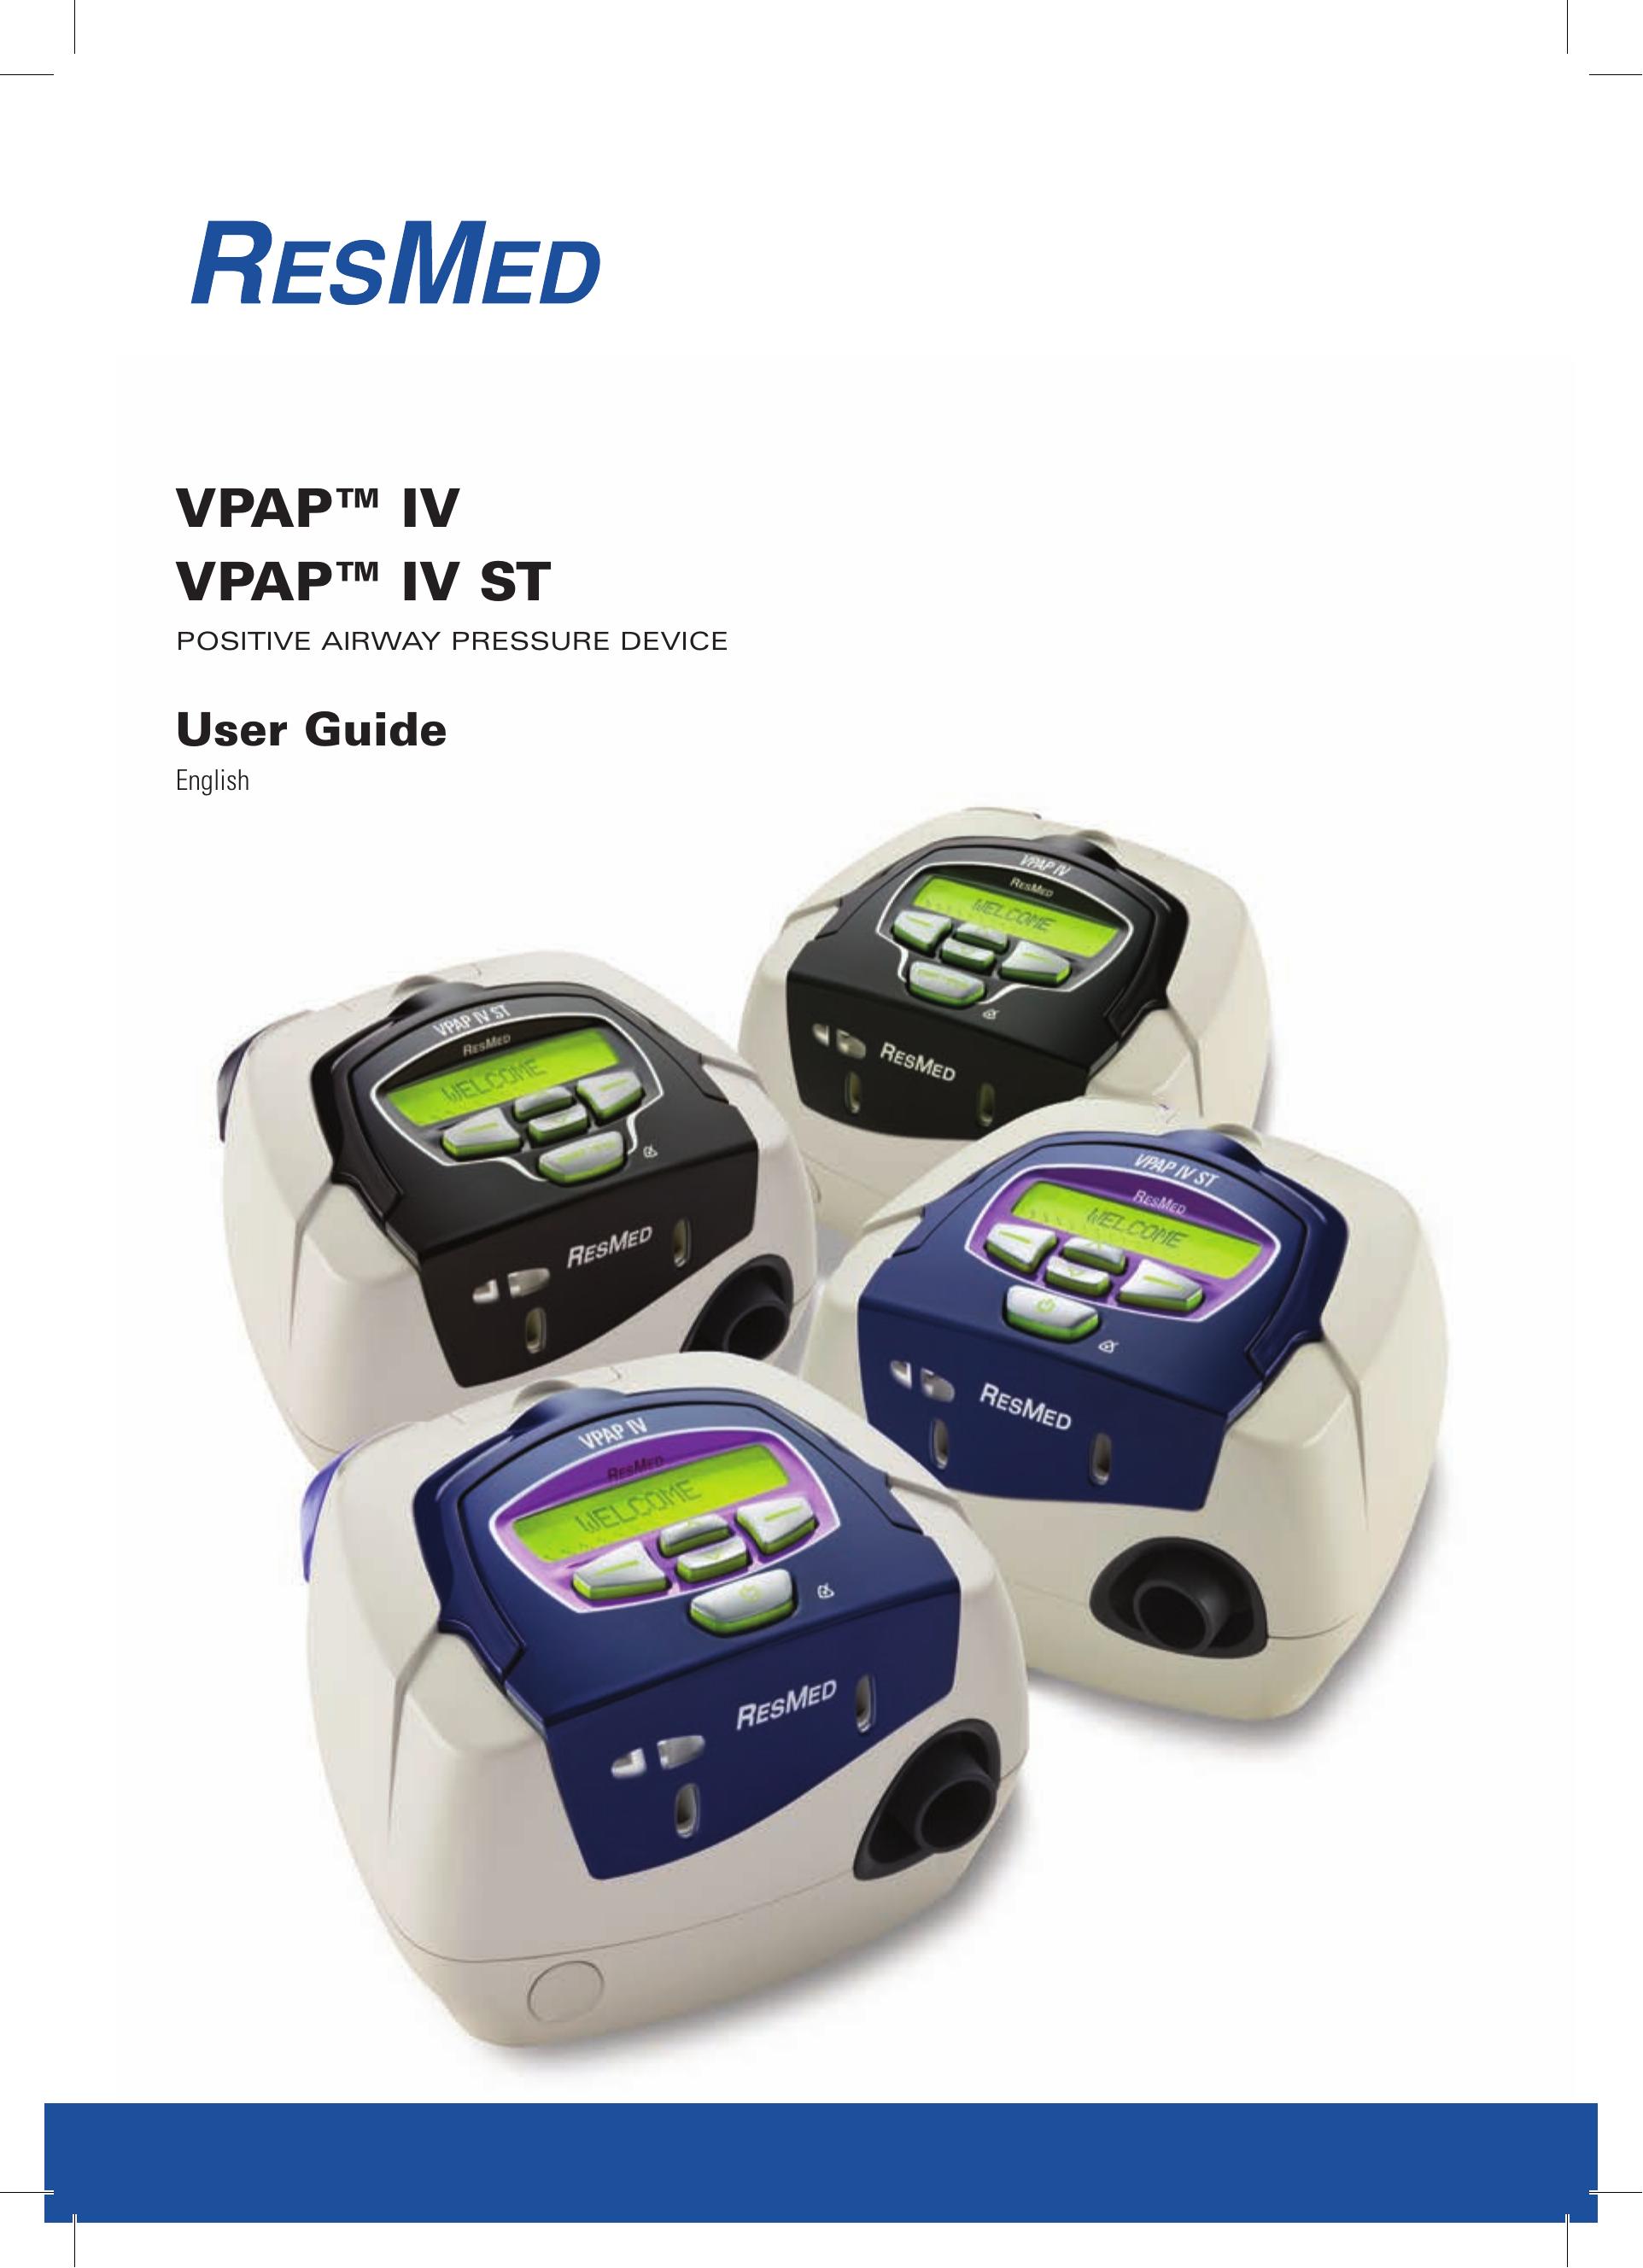 ResMed VPAP IV Respiratory Product User Manual